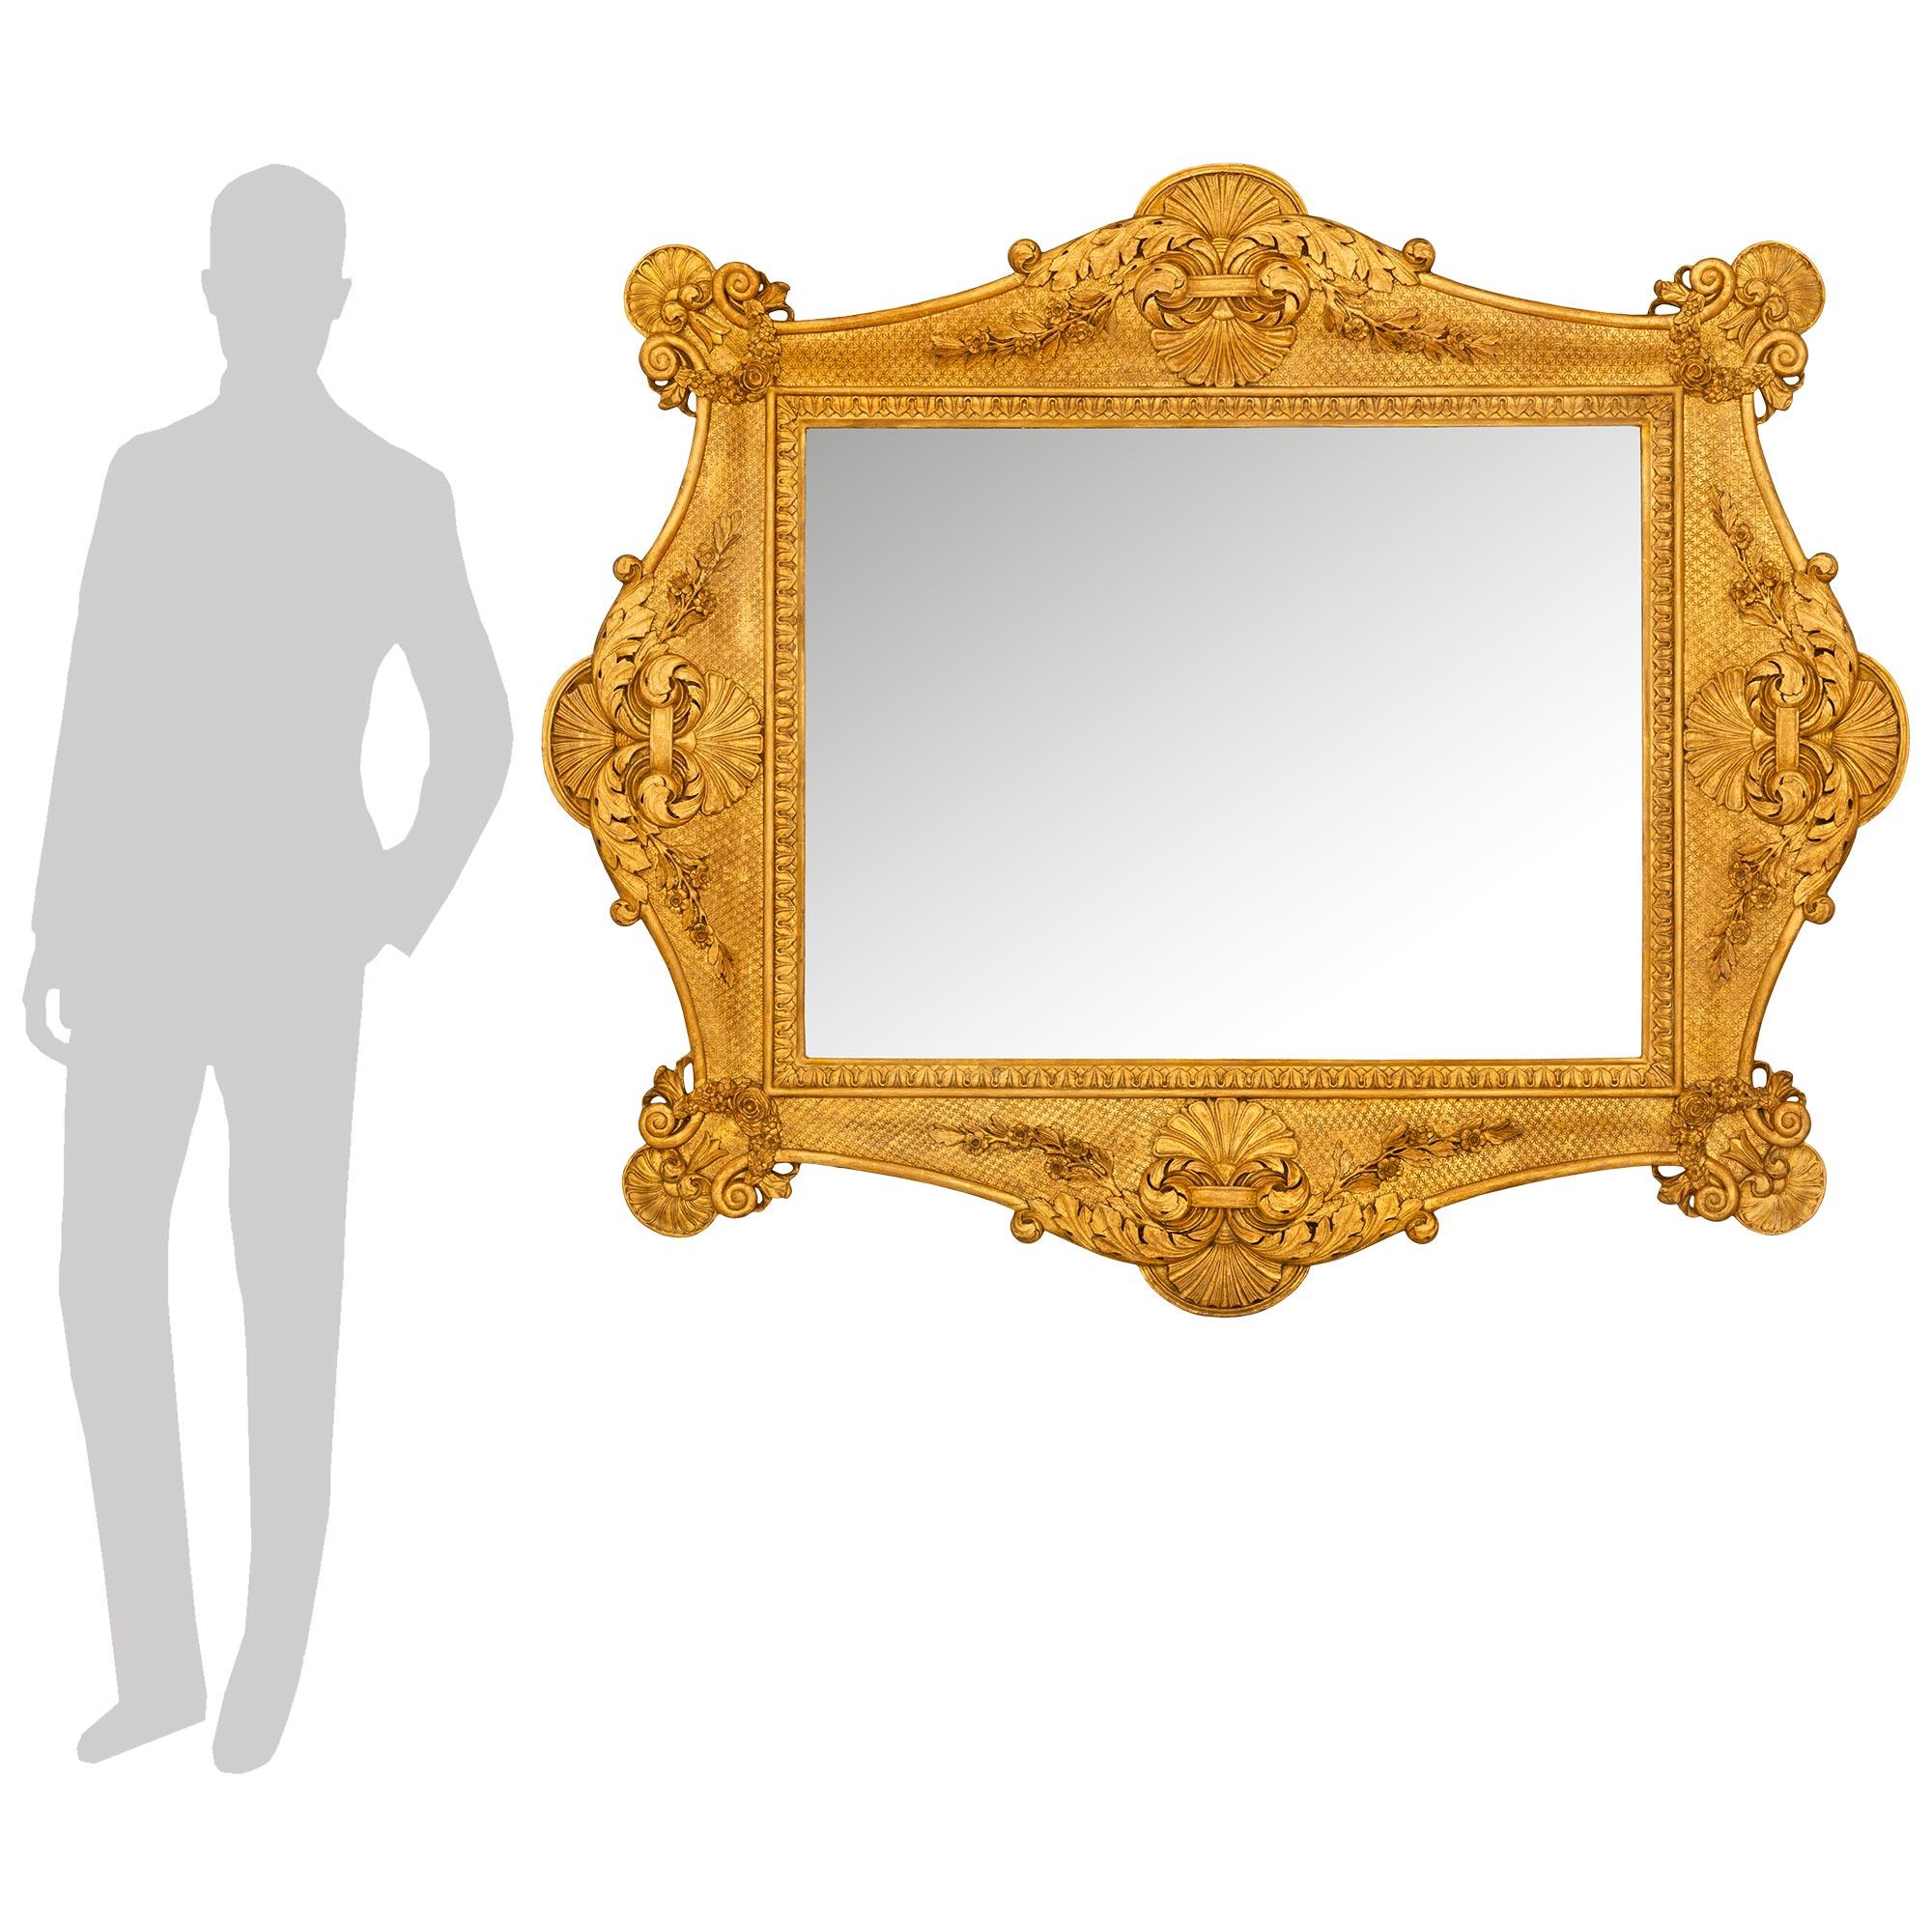 A stunning and most decorative Italian early 19th century Baroque st. Giltwood mirror. The mirror retains its original mirror plate framed within a fine straight mottled border with a wrap around foliate band. The frame displays elegant and most